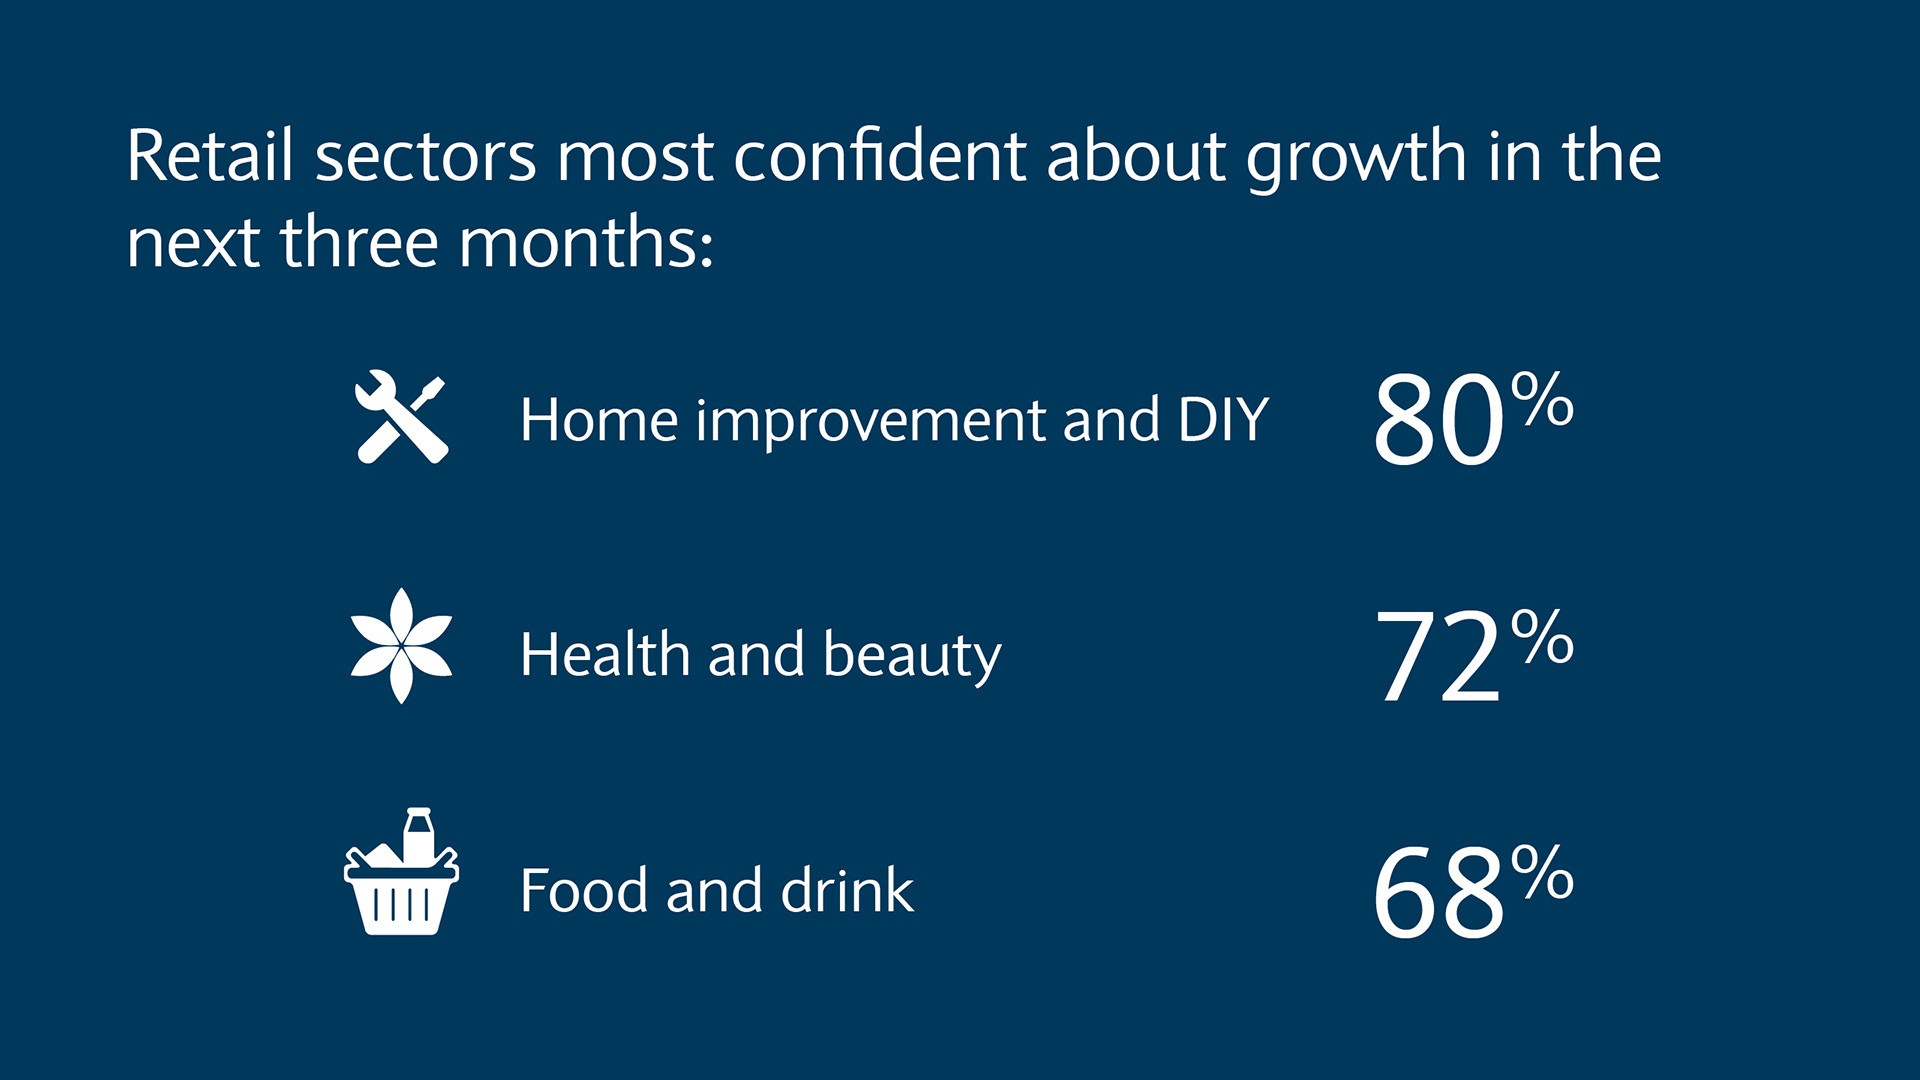 Retail sectors most confident about growth in the next three months. Home improvement and DIY - 80%, Health and beauty - 72%, Food and drink - 68%.